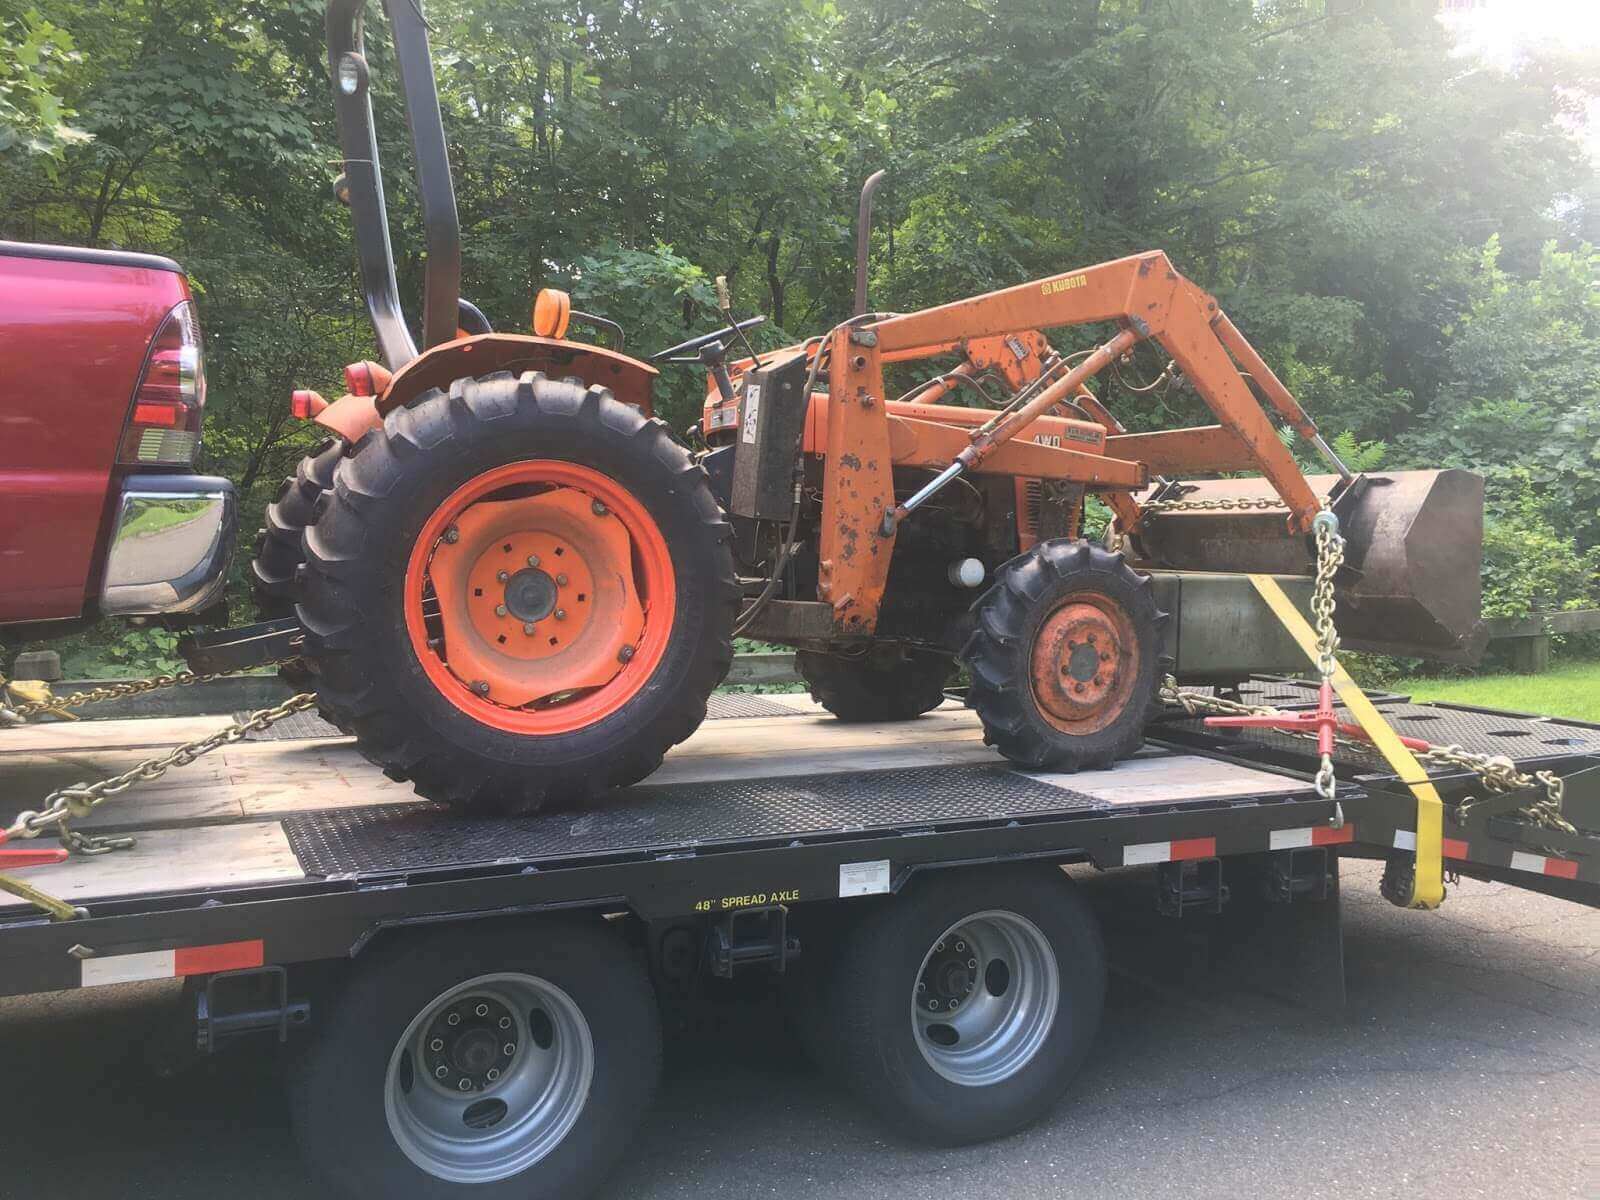  1983 Kubota L275 Tractor being transported